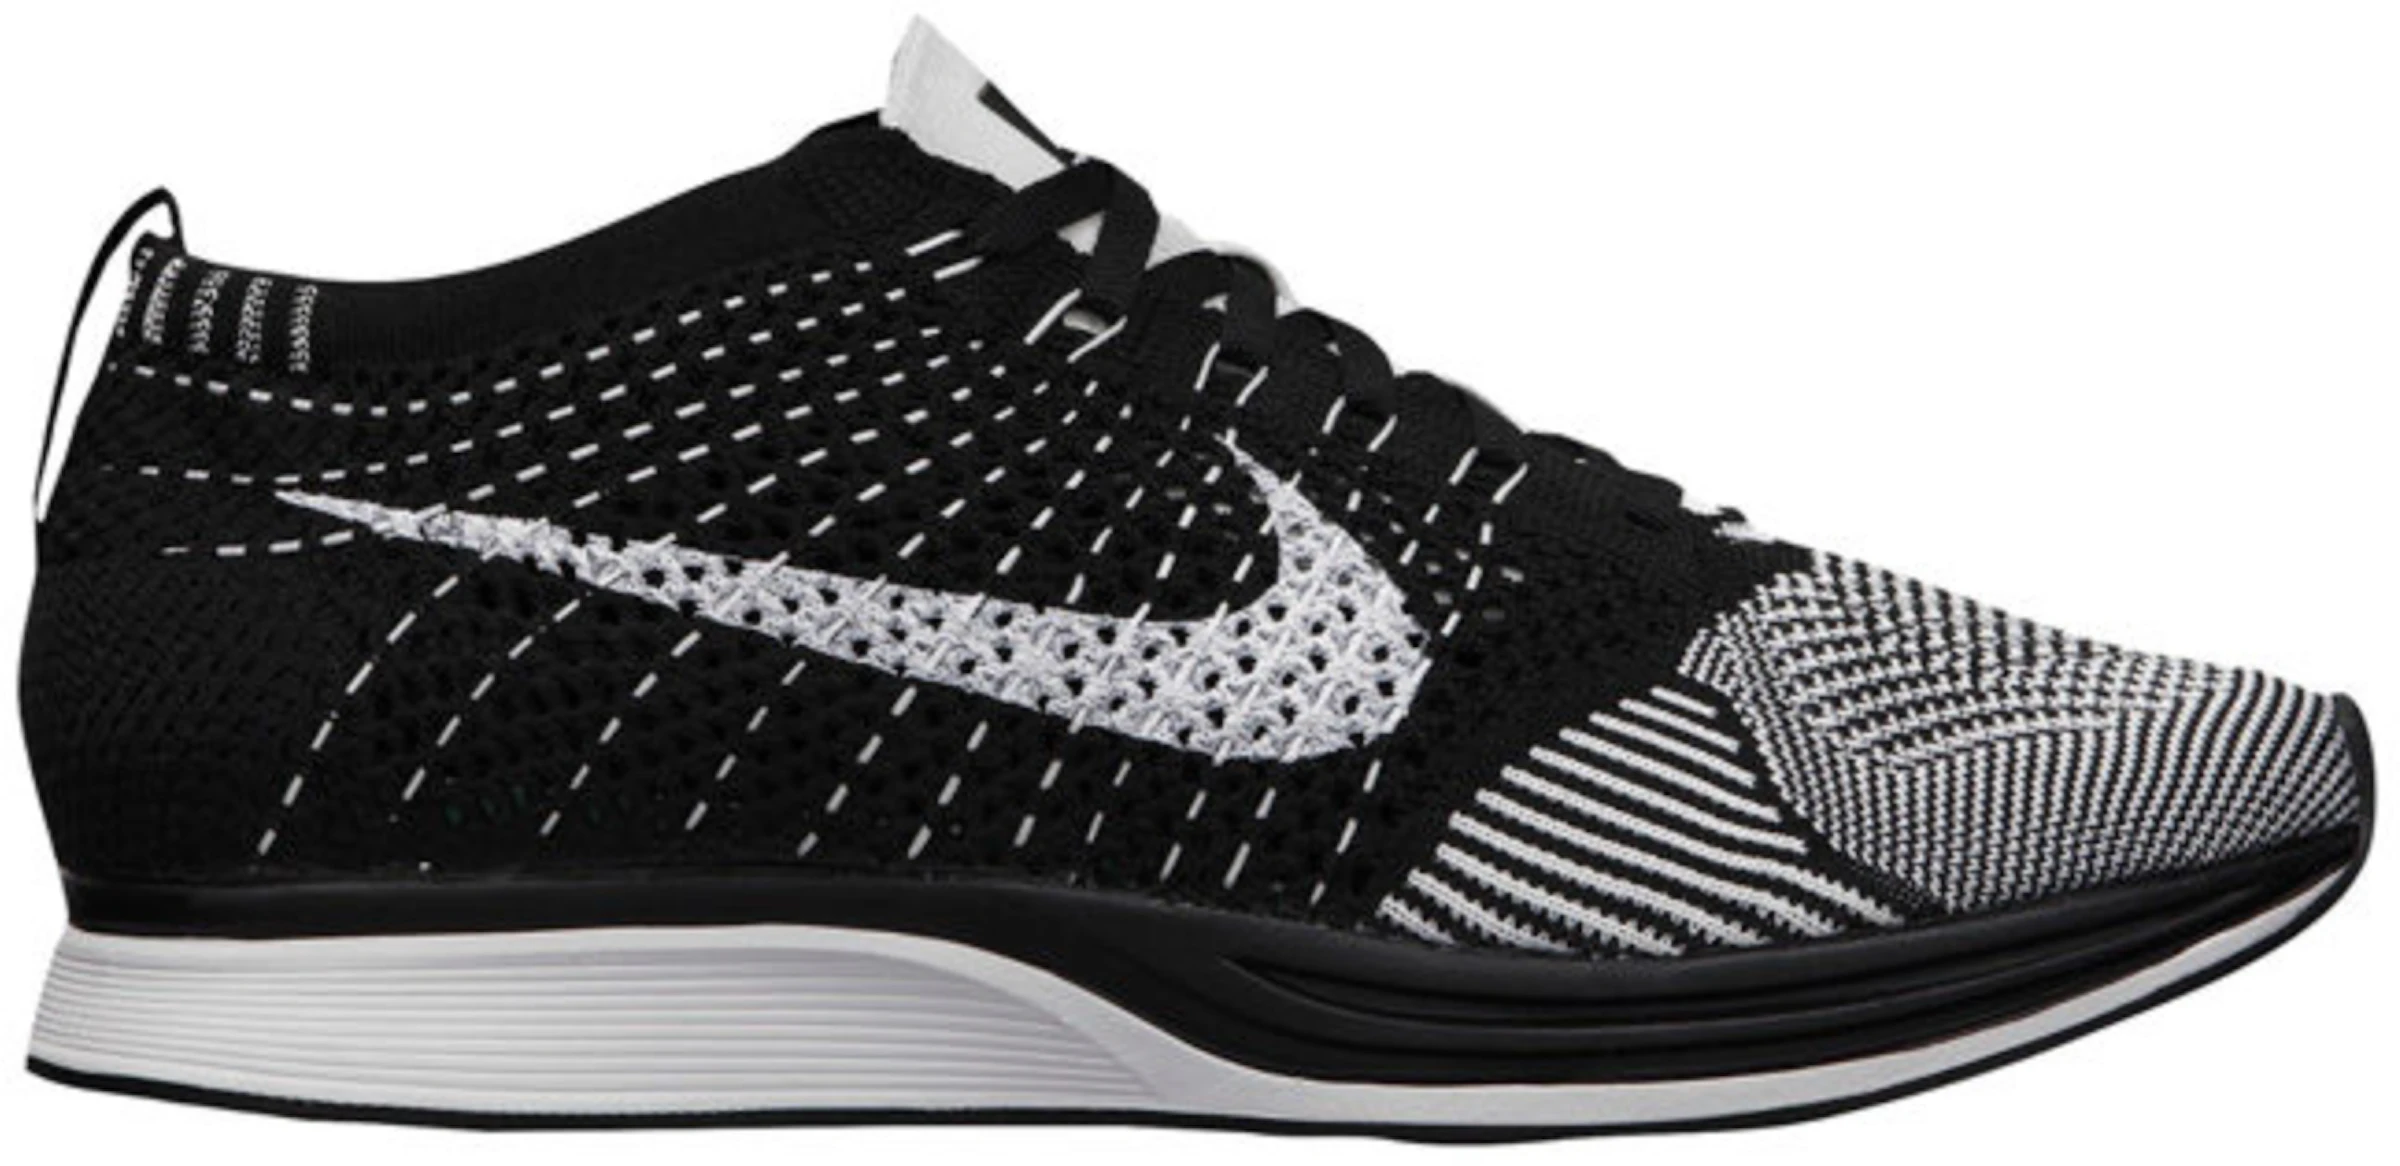 Tregua Mente siete y media Nike Flyknit Racer Orca White Tongue (2013) - 526628-002 - ES